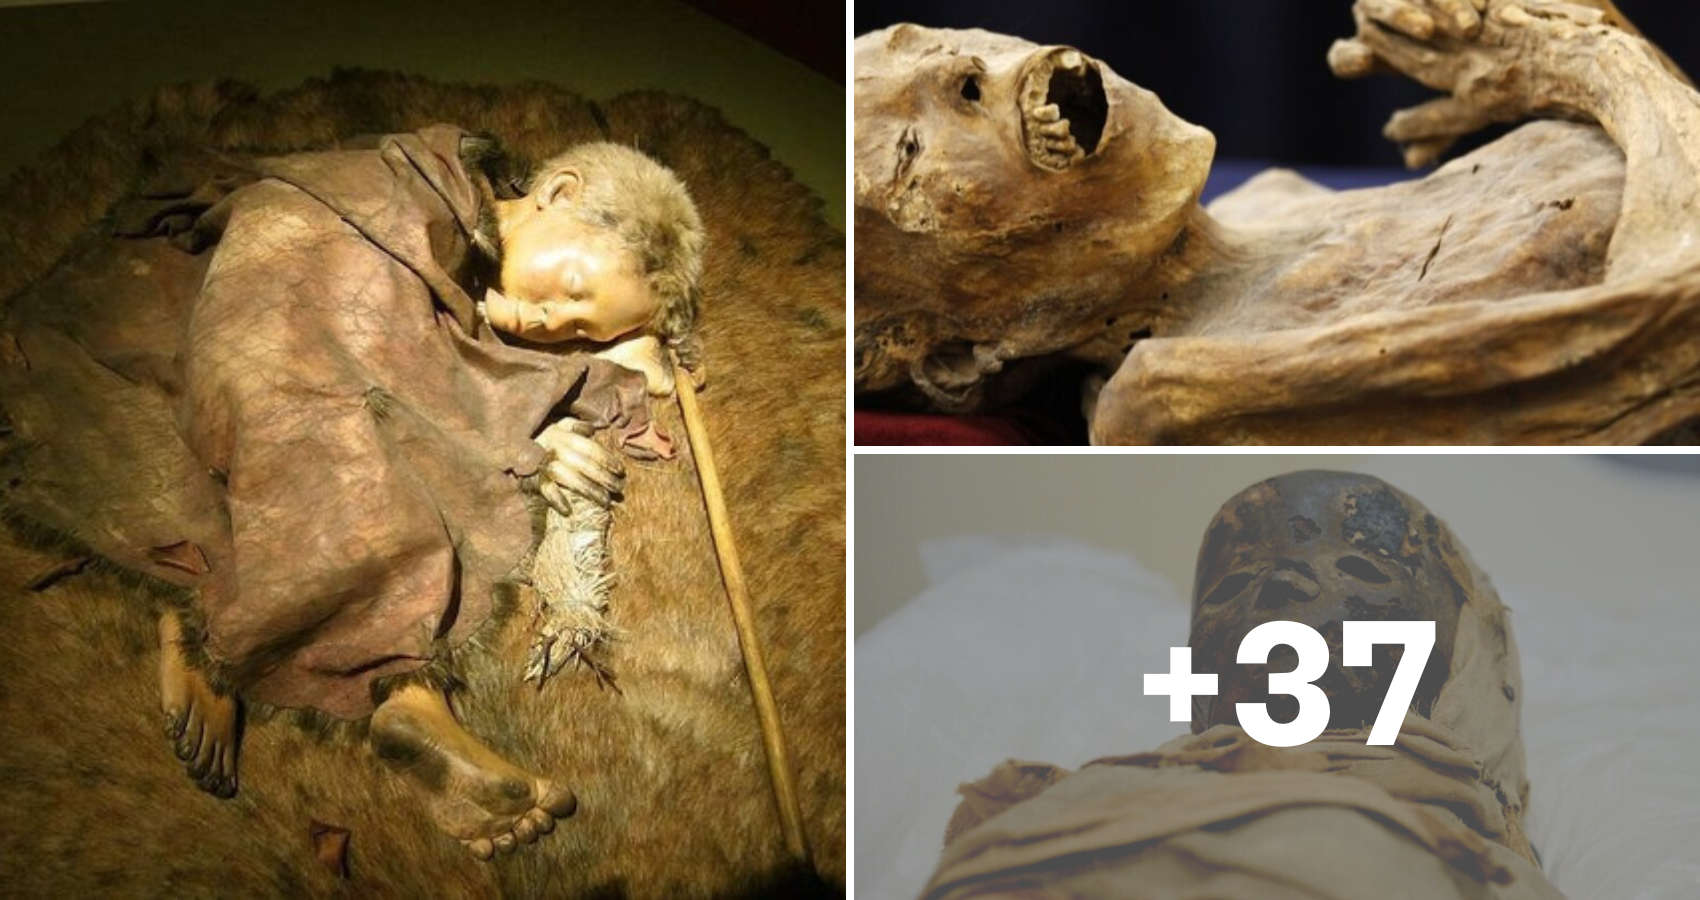 The Identity Of Four-Year-Old Laredo Kid Mummy, Who May Be Neanderthal/Human Hybrid, Has Not Been Identified